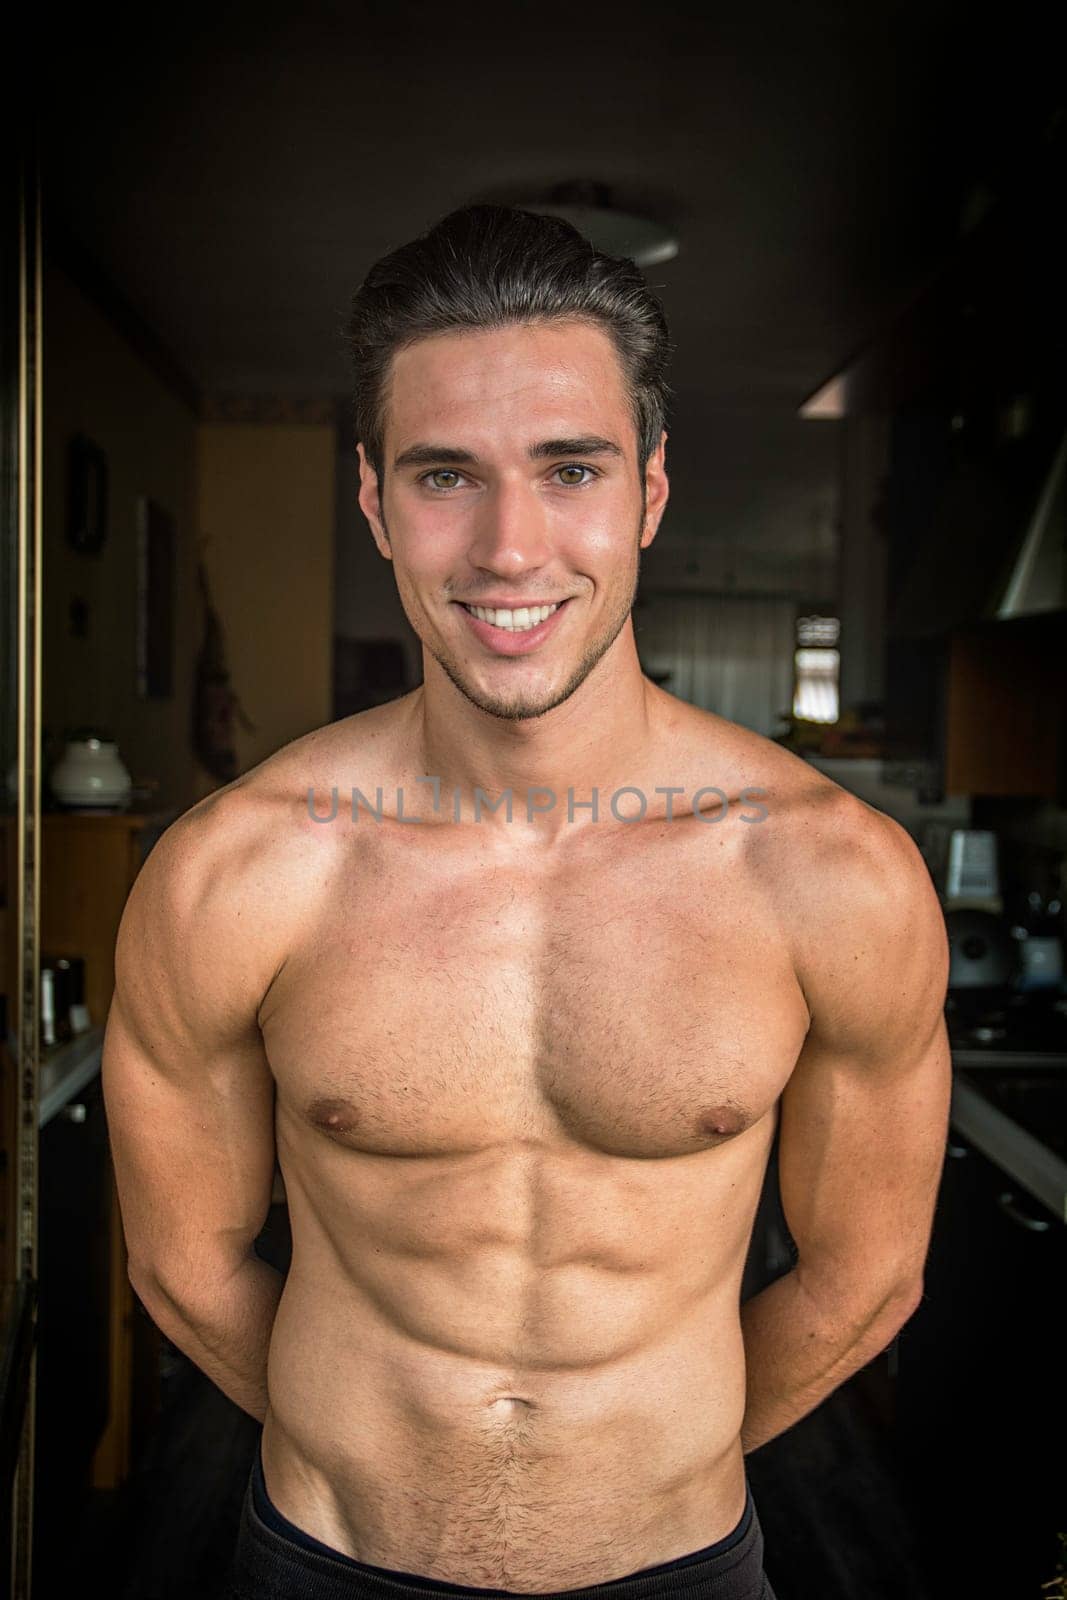 A young handsome athletic muscular man with no shirt posing for a picture inside a house, looking at camera smiling